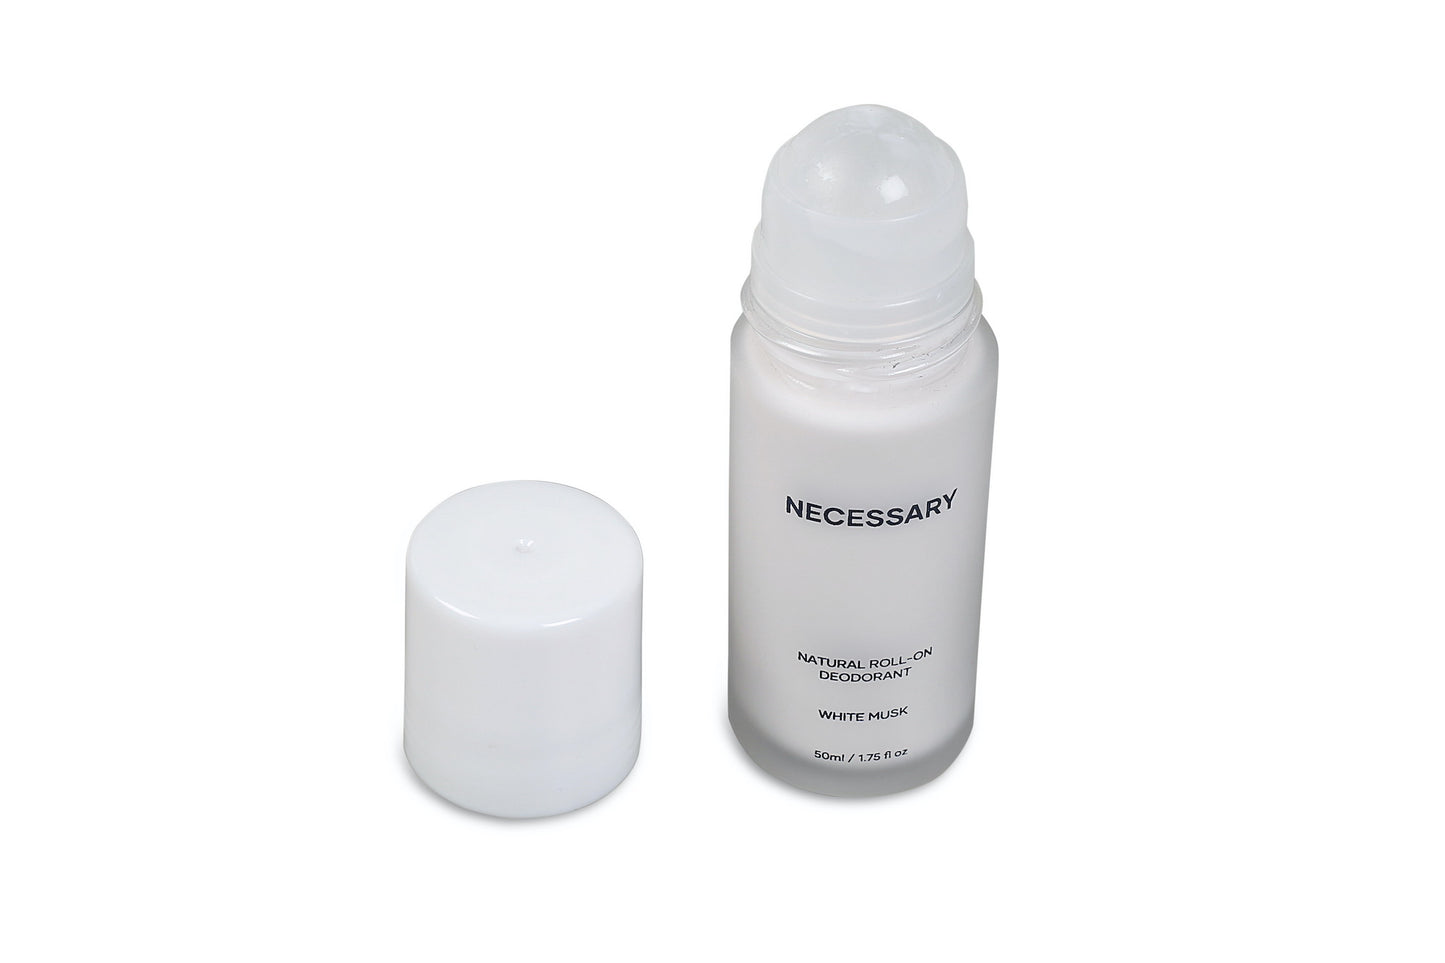 NATURAL ROLL-ON DEODORANT WHITE MUSK